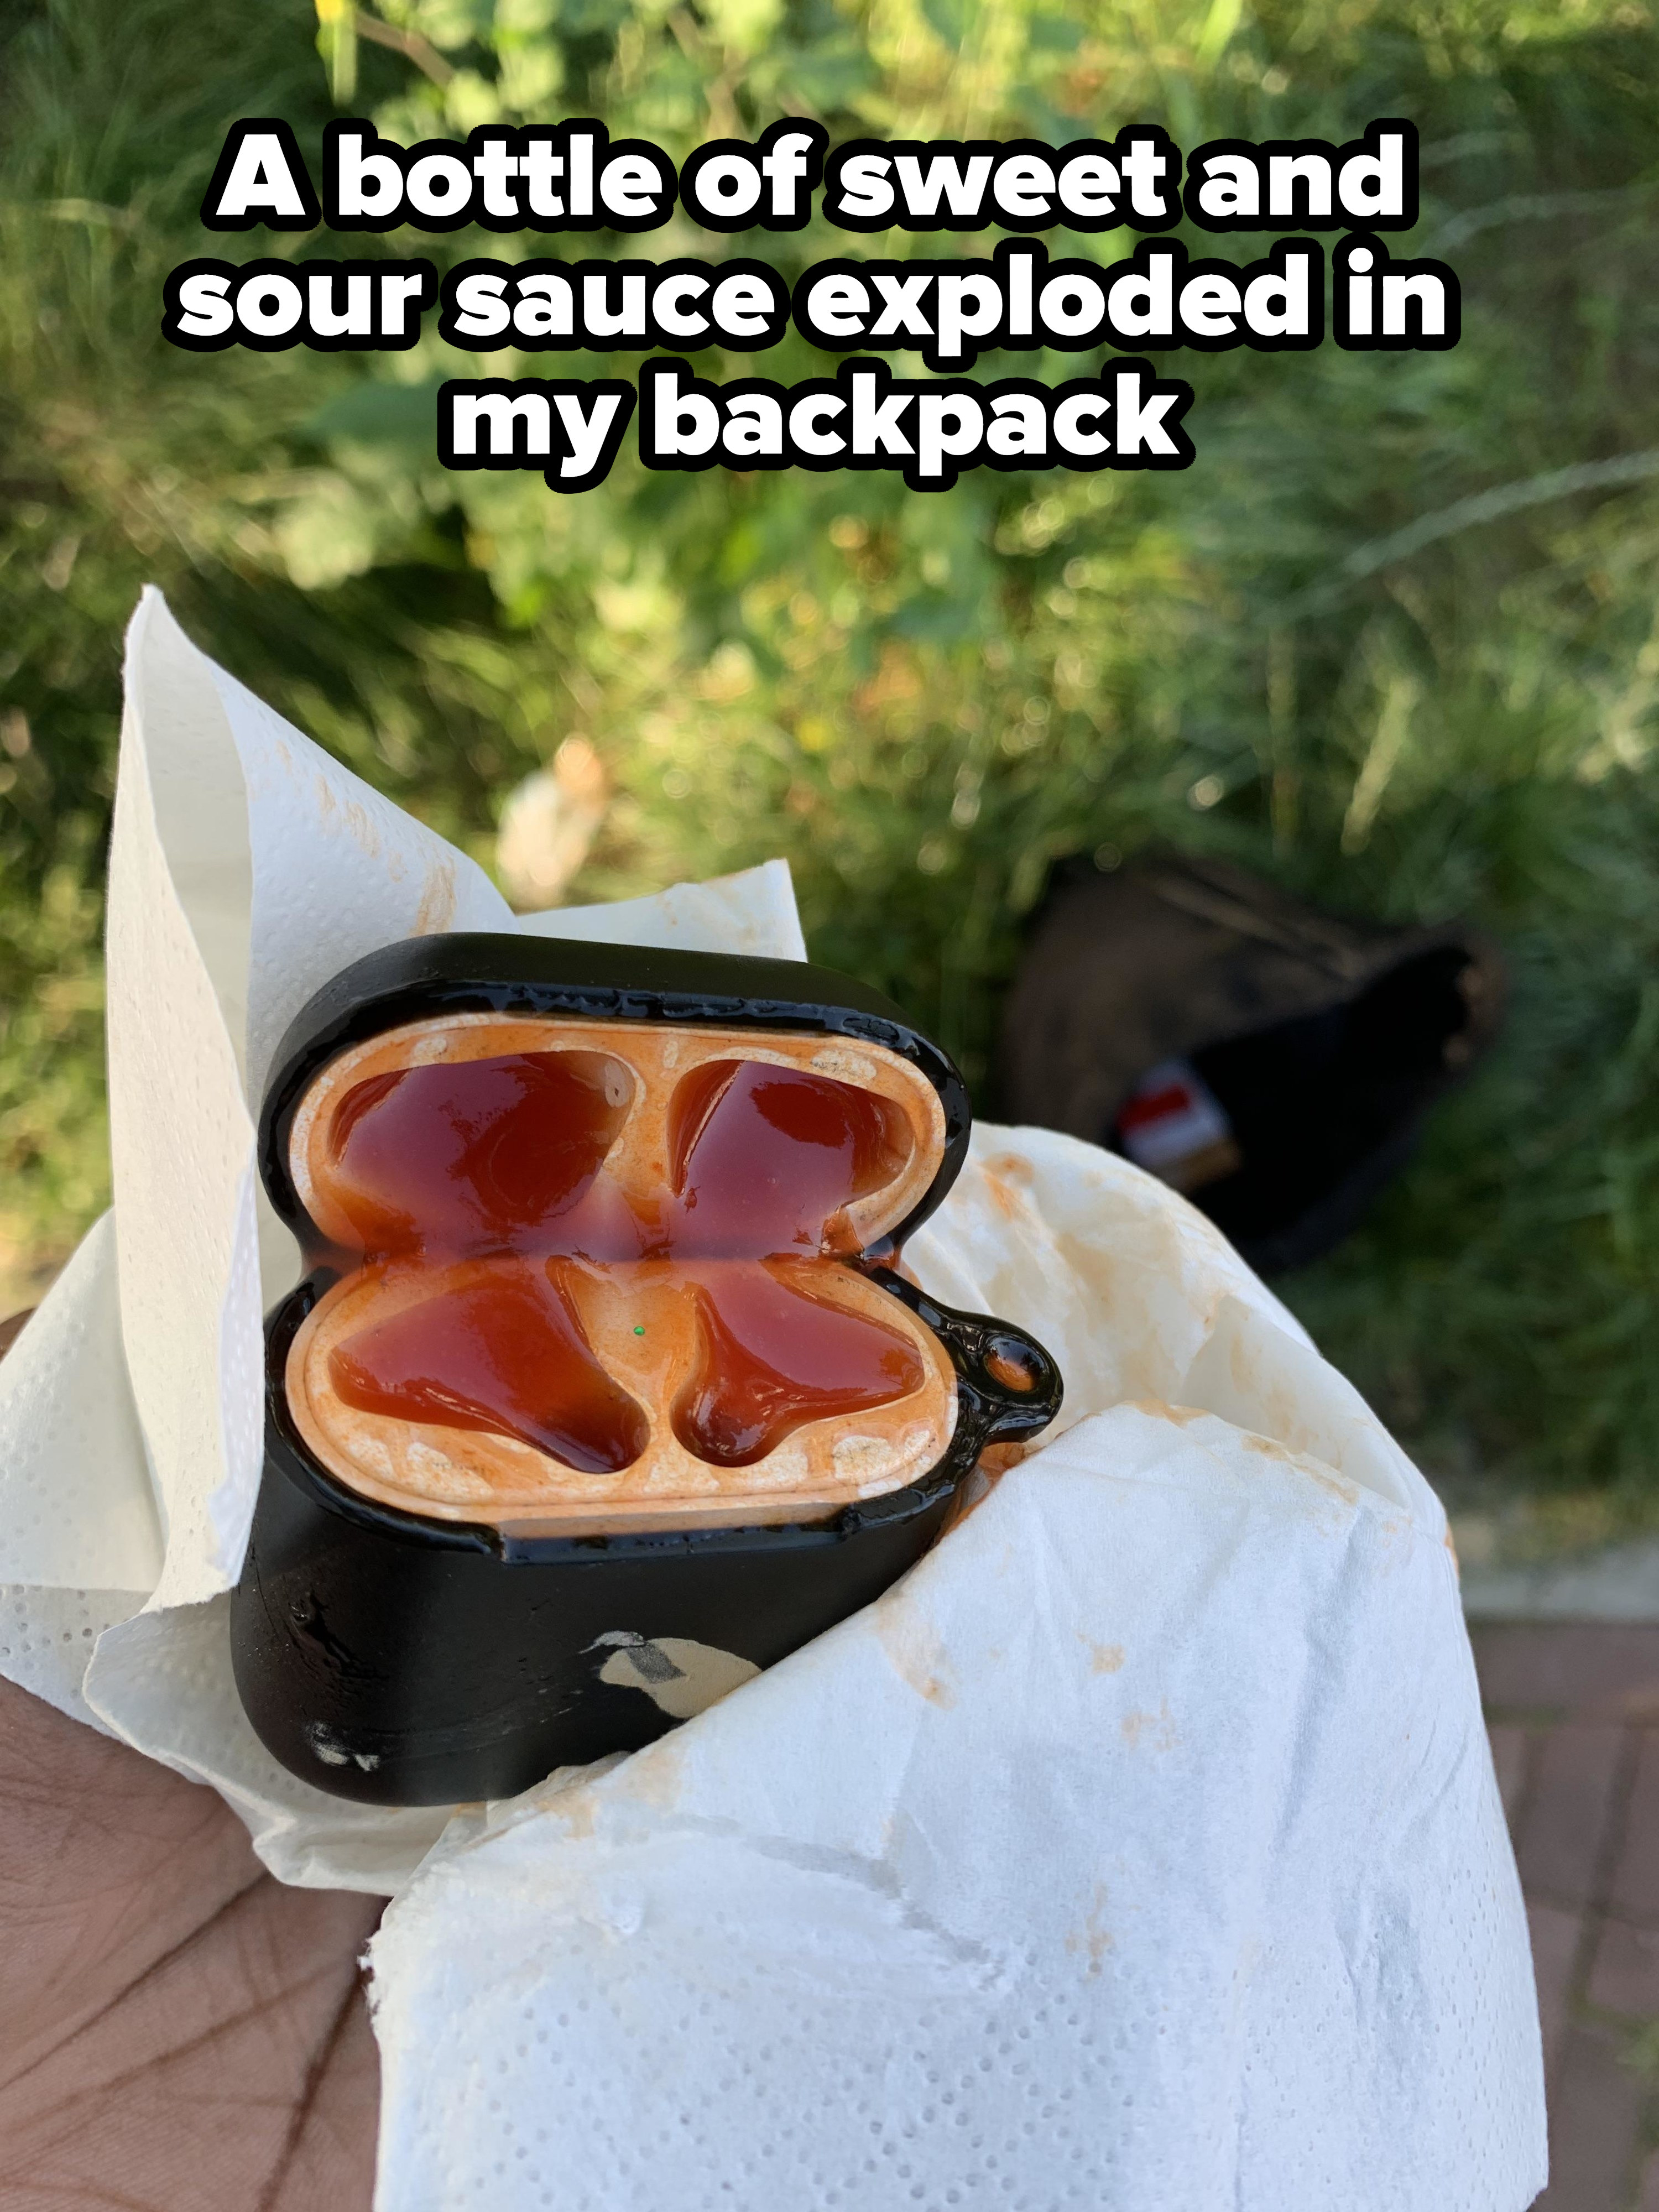 airpods case filled with sweet and sour sauce after a bottle explosion